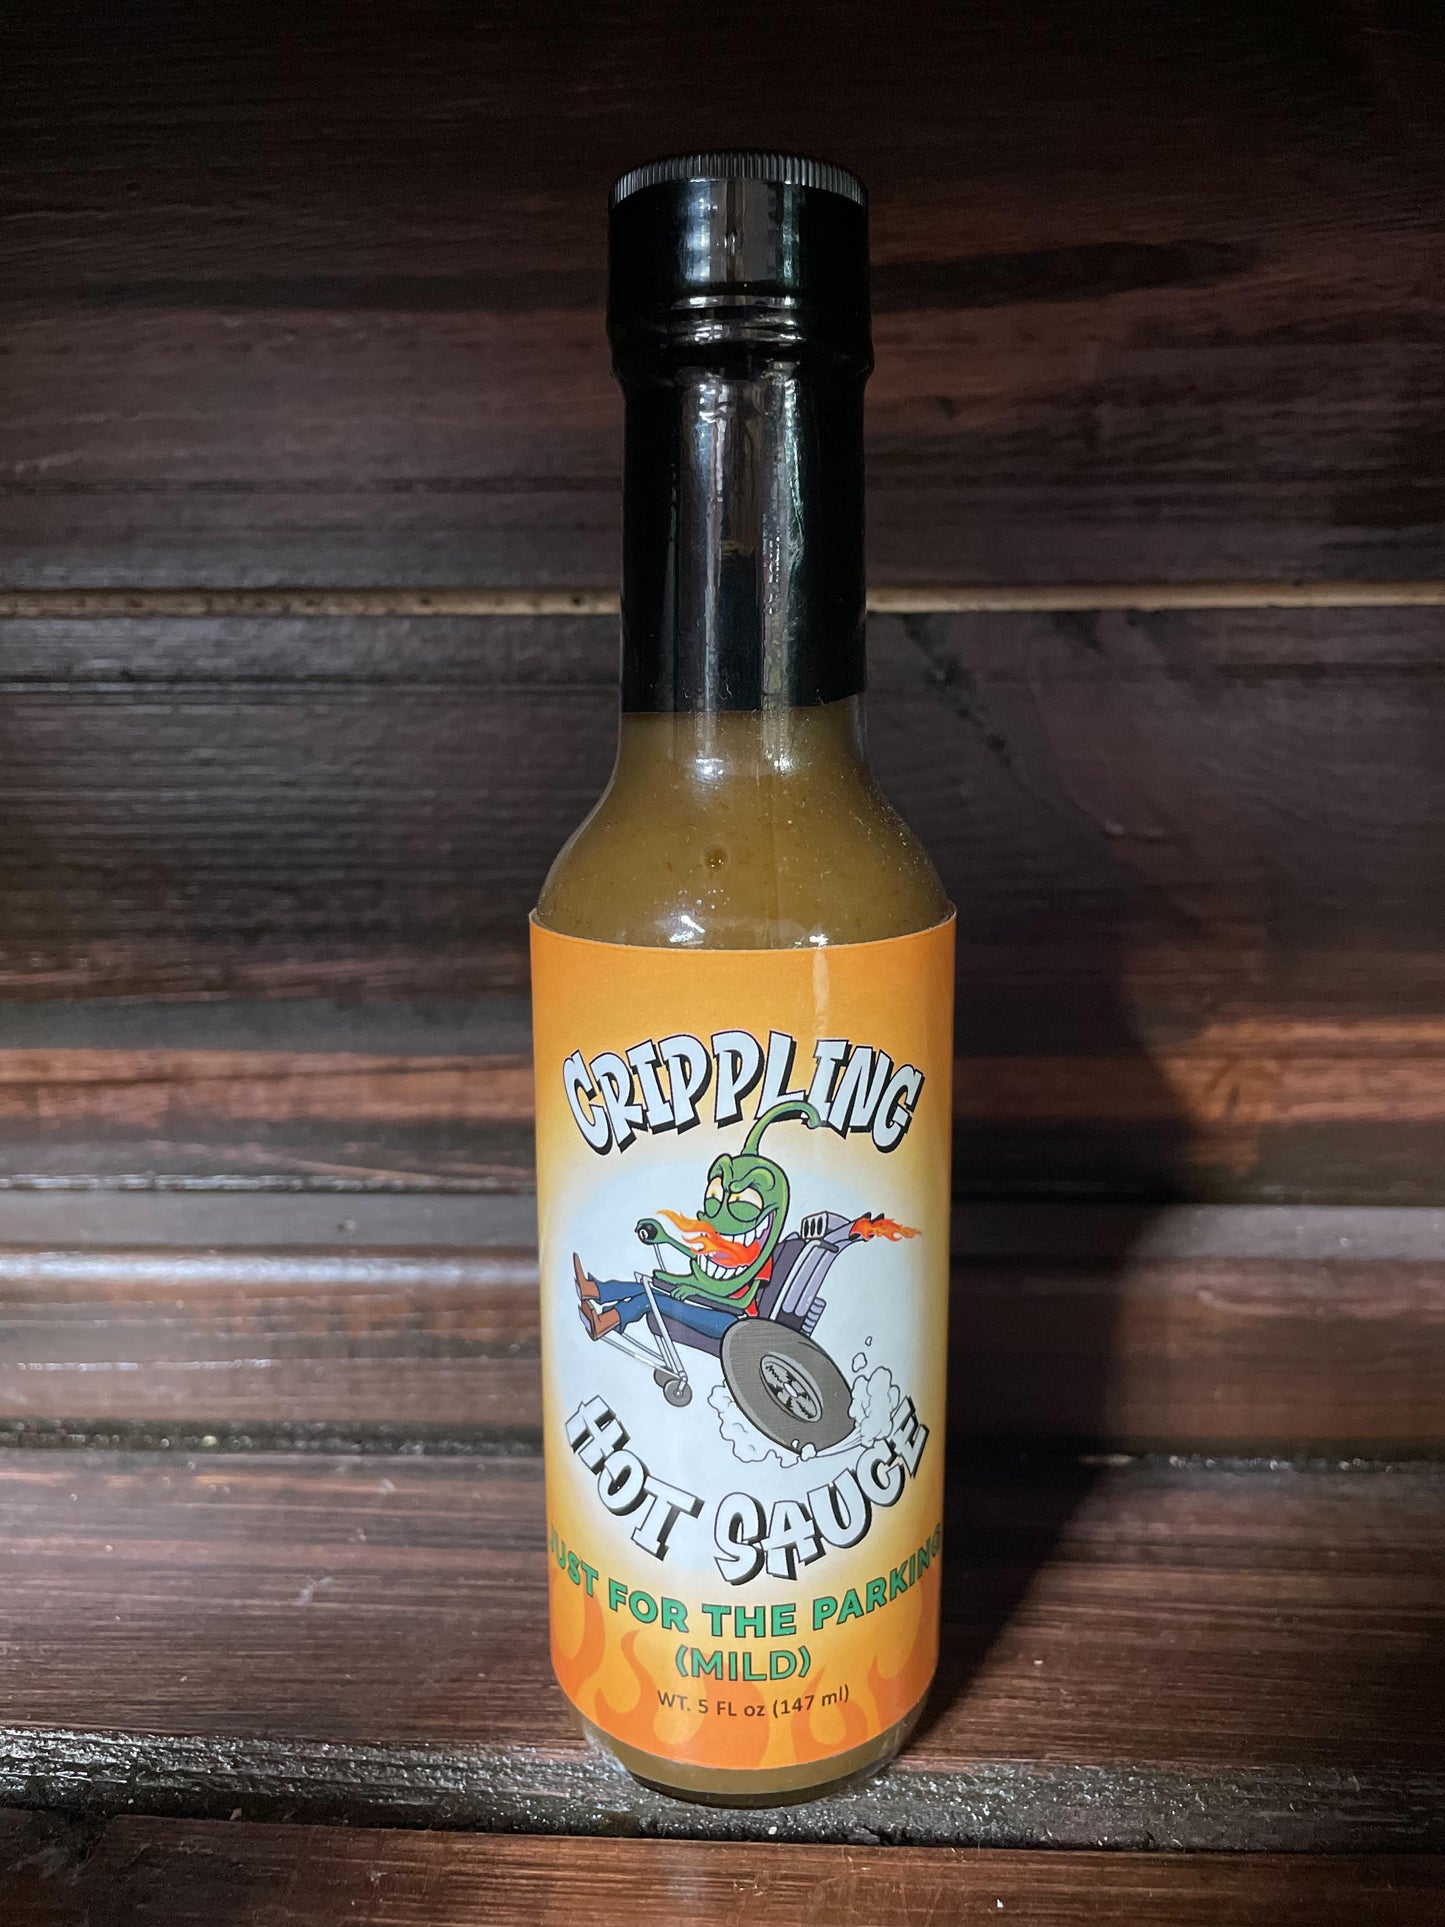 Crippling Hot Sauce - Just For the Parking (Mild)